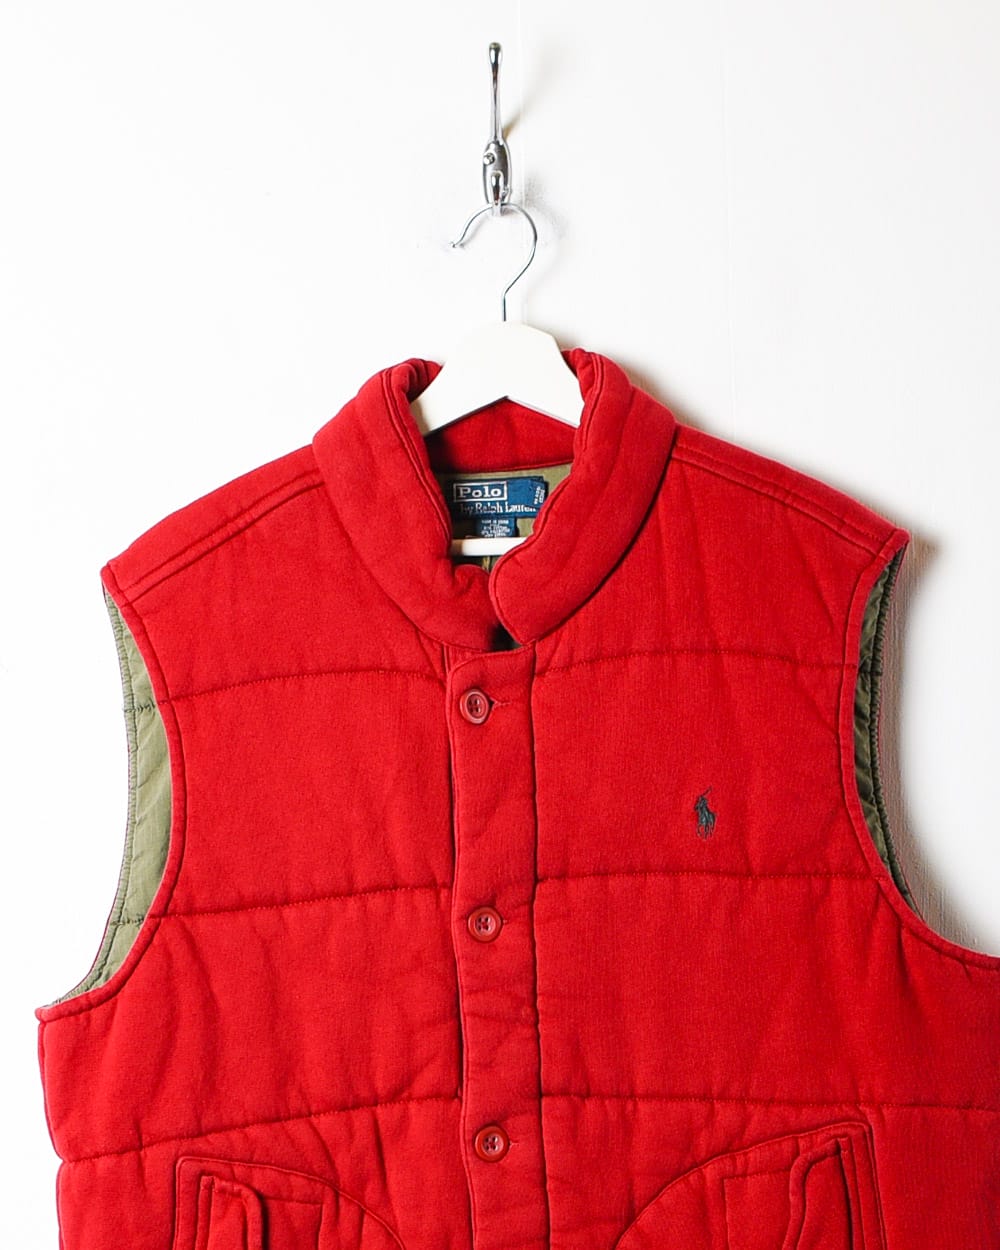 Red Polo Ralph Lauren Gilet - X-Large